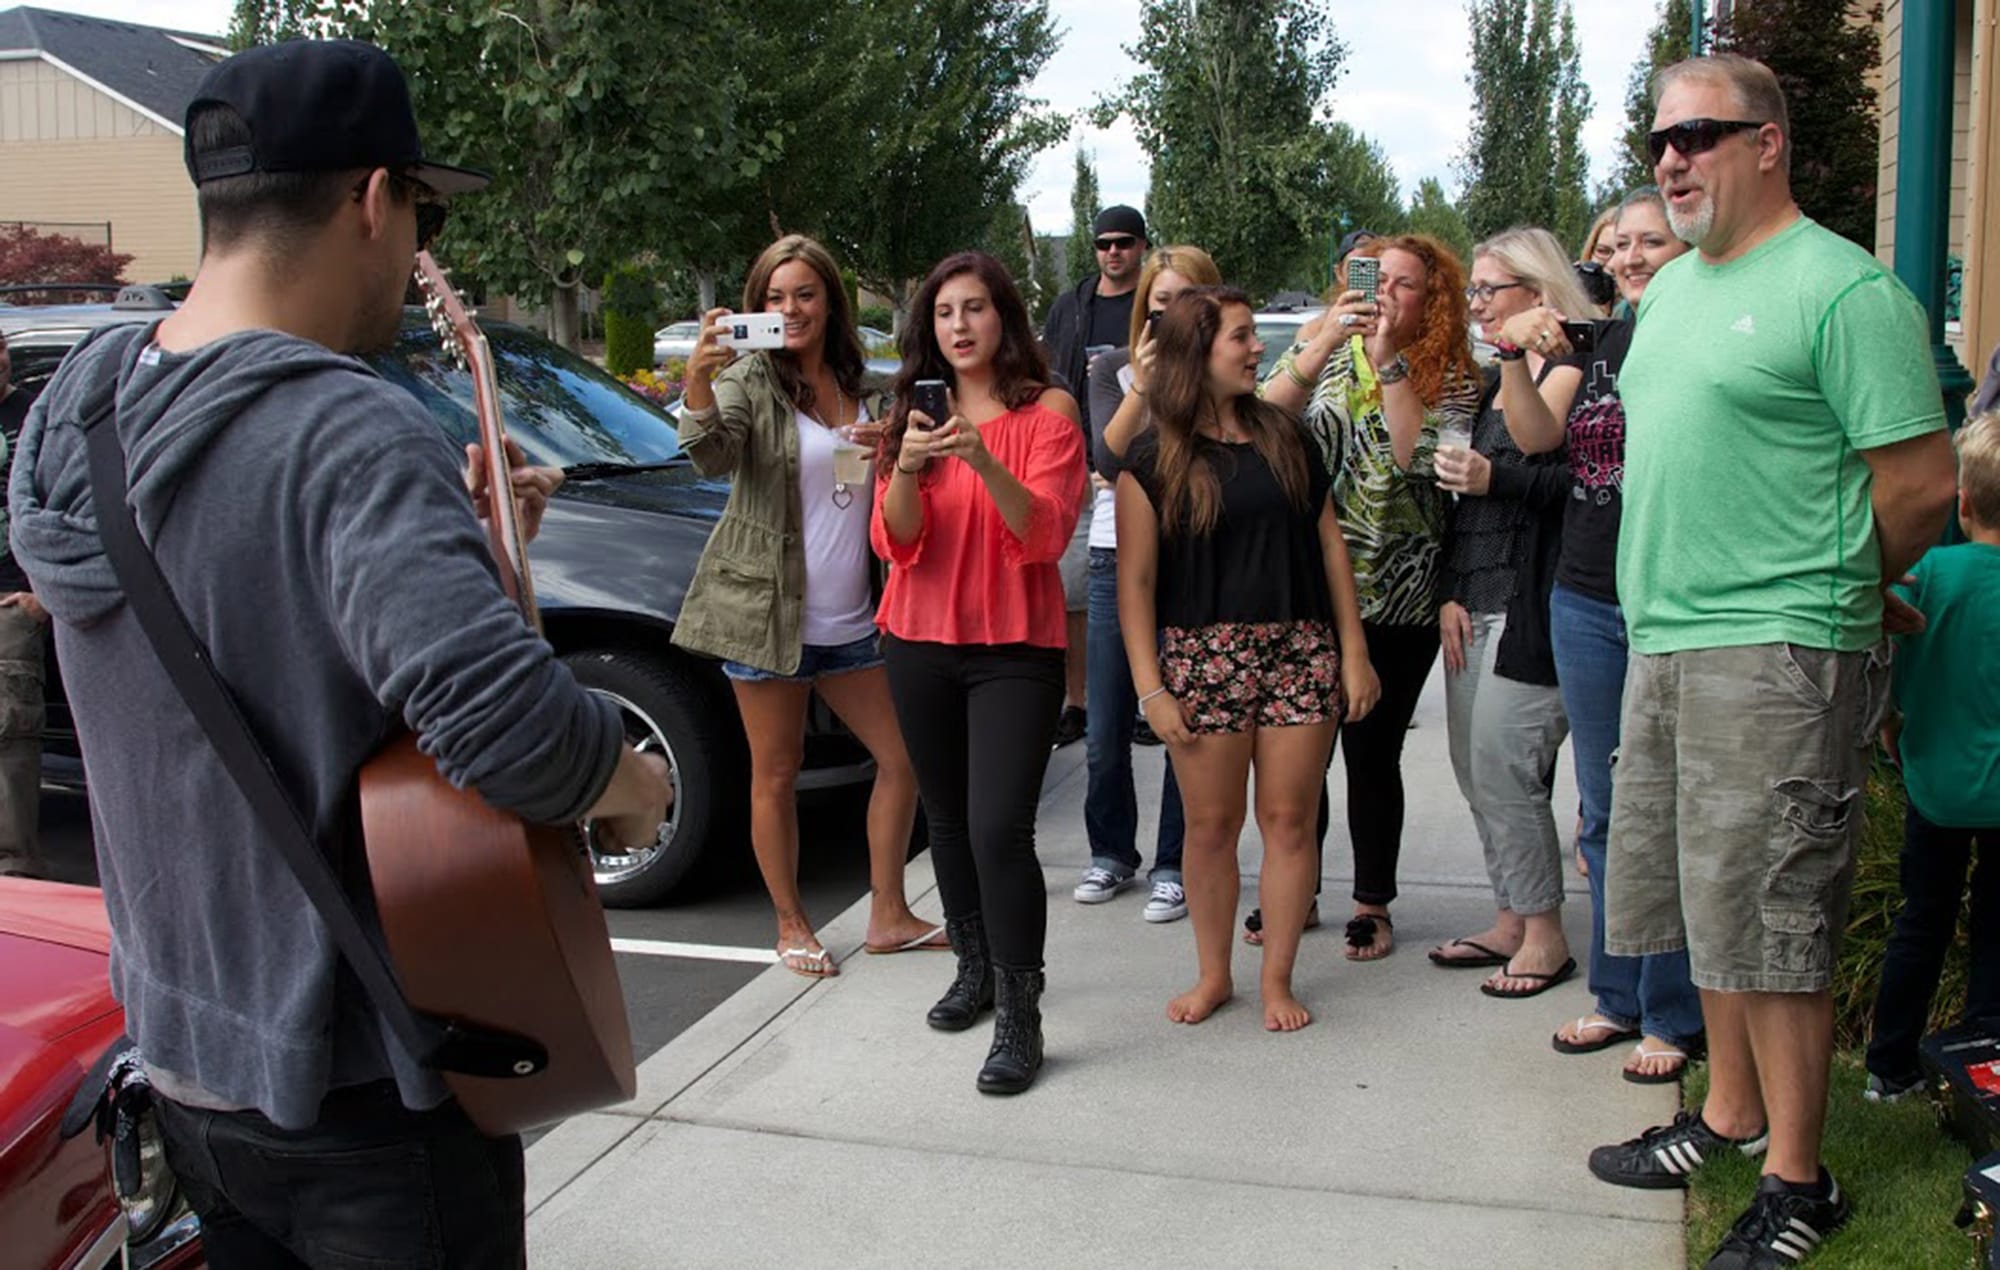 The Andersen family of Vancouver got a special performance outside their home Sunday afternoon from Panic! At The Disco frontman Brendon Urie, who also gave the family the 1972 Chevrolet Impala used in the band's &quot;Miss Jackson&quot; music video.